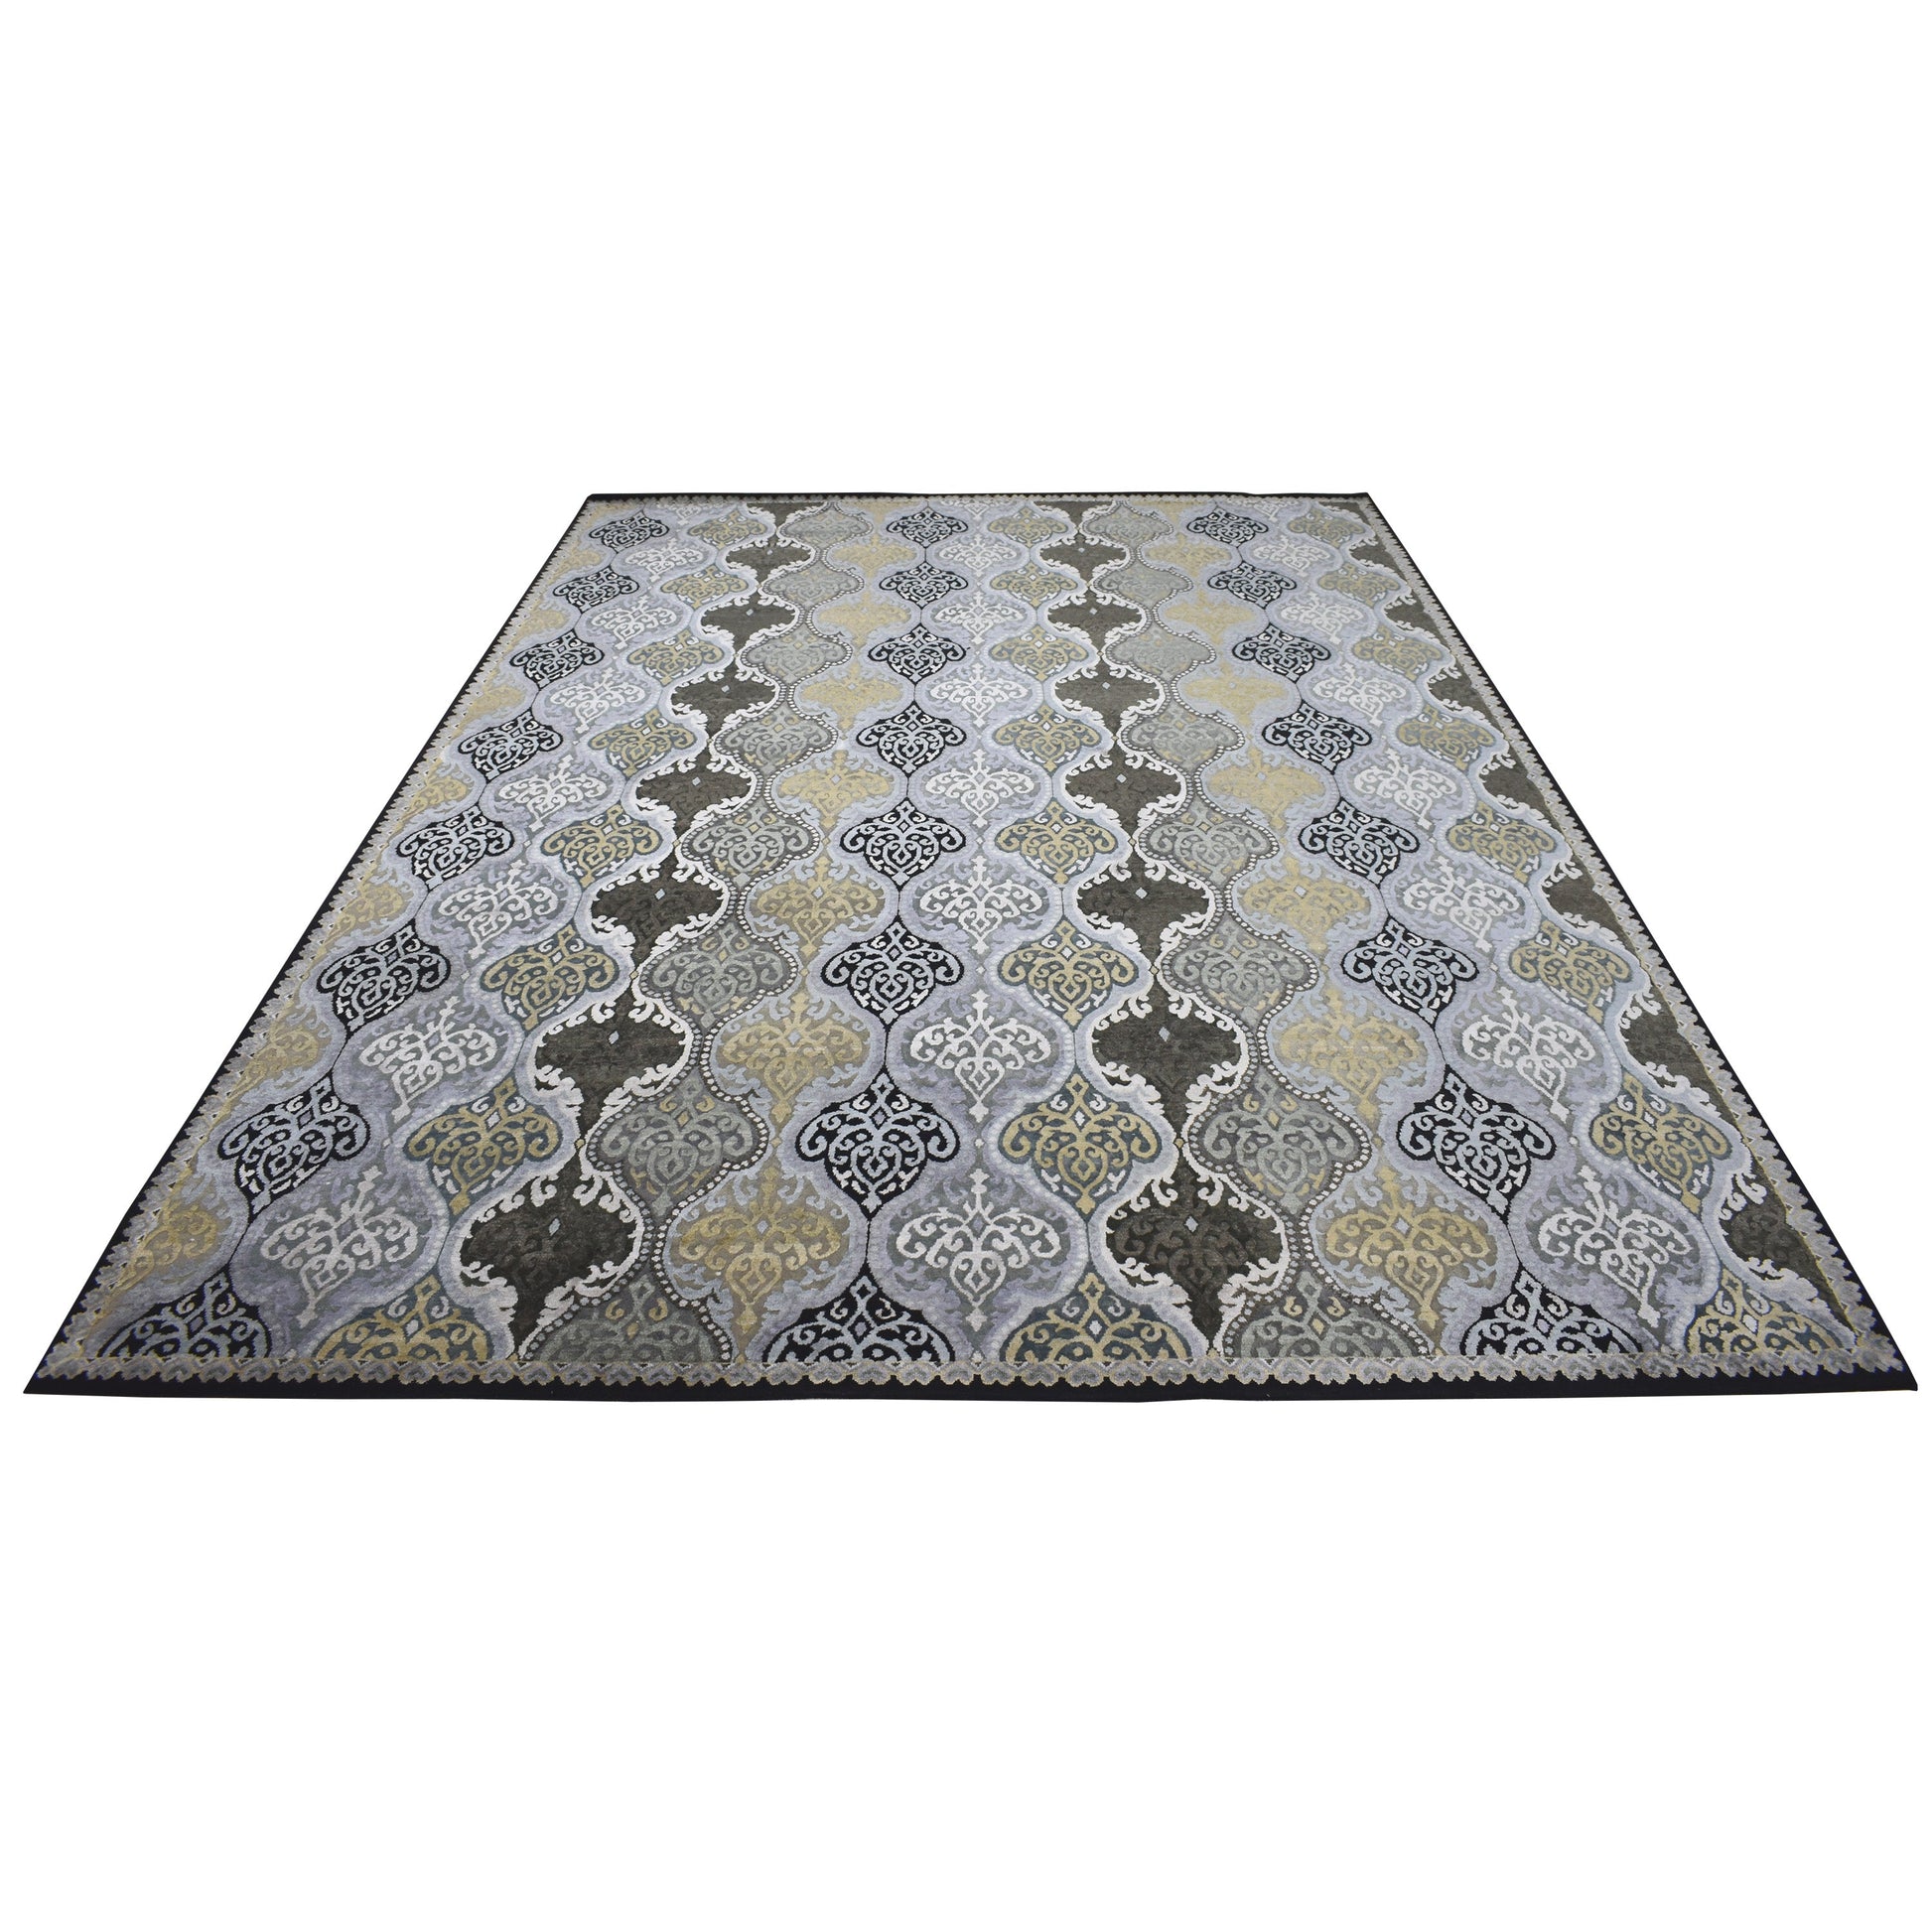 Get trendy with Wazir Damask Blue, Black and Multy Silk and Wool Transitional Handknotted Area Rug - Transitional Rugs available at Jaipur Oriental Rugs. Grab yours for $5860.00 today!